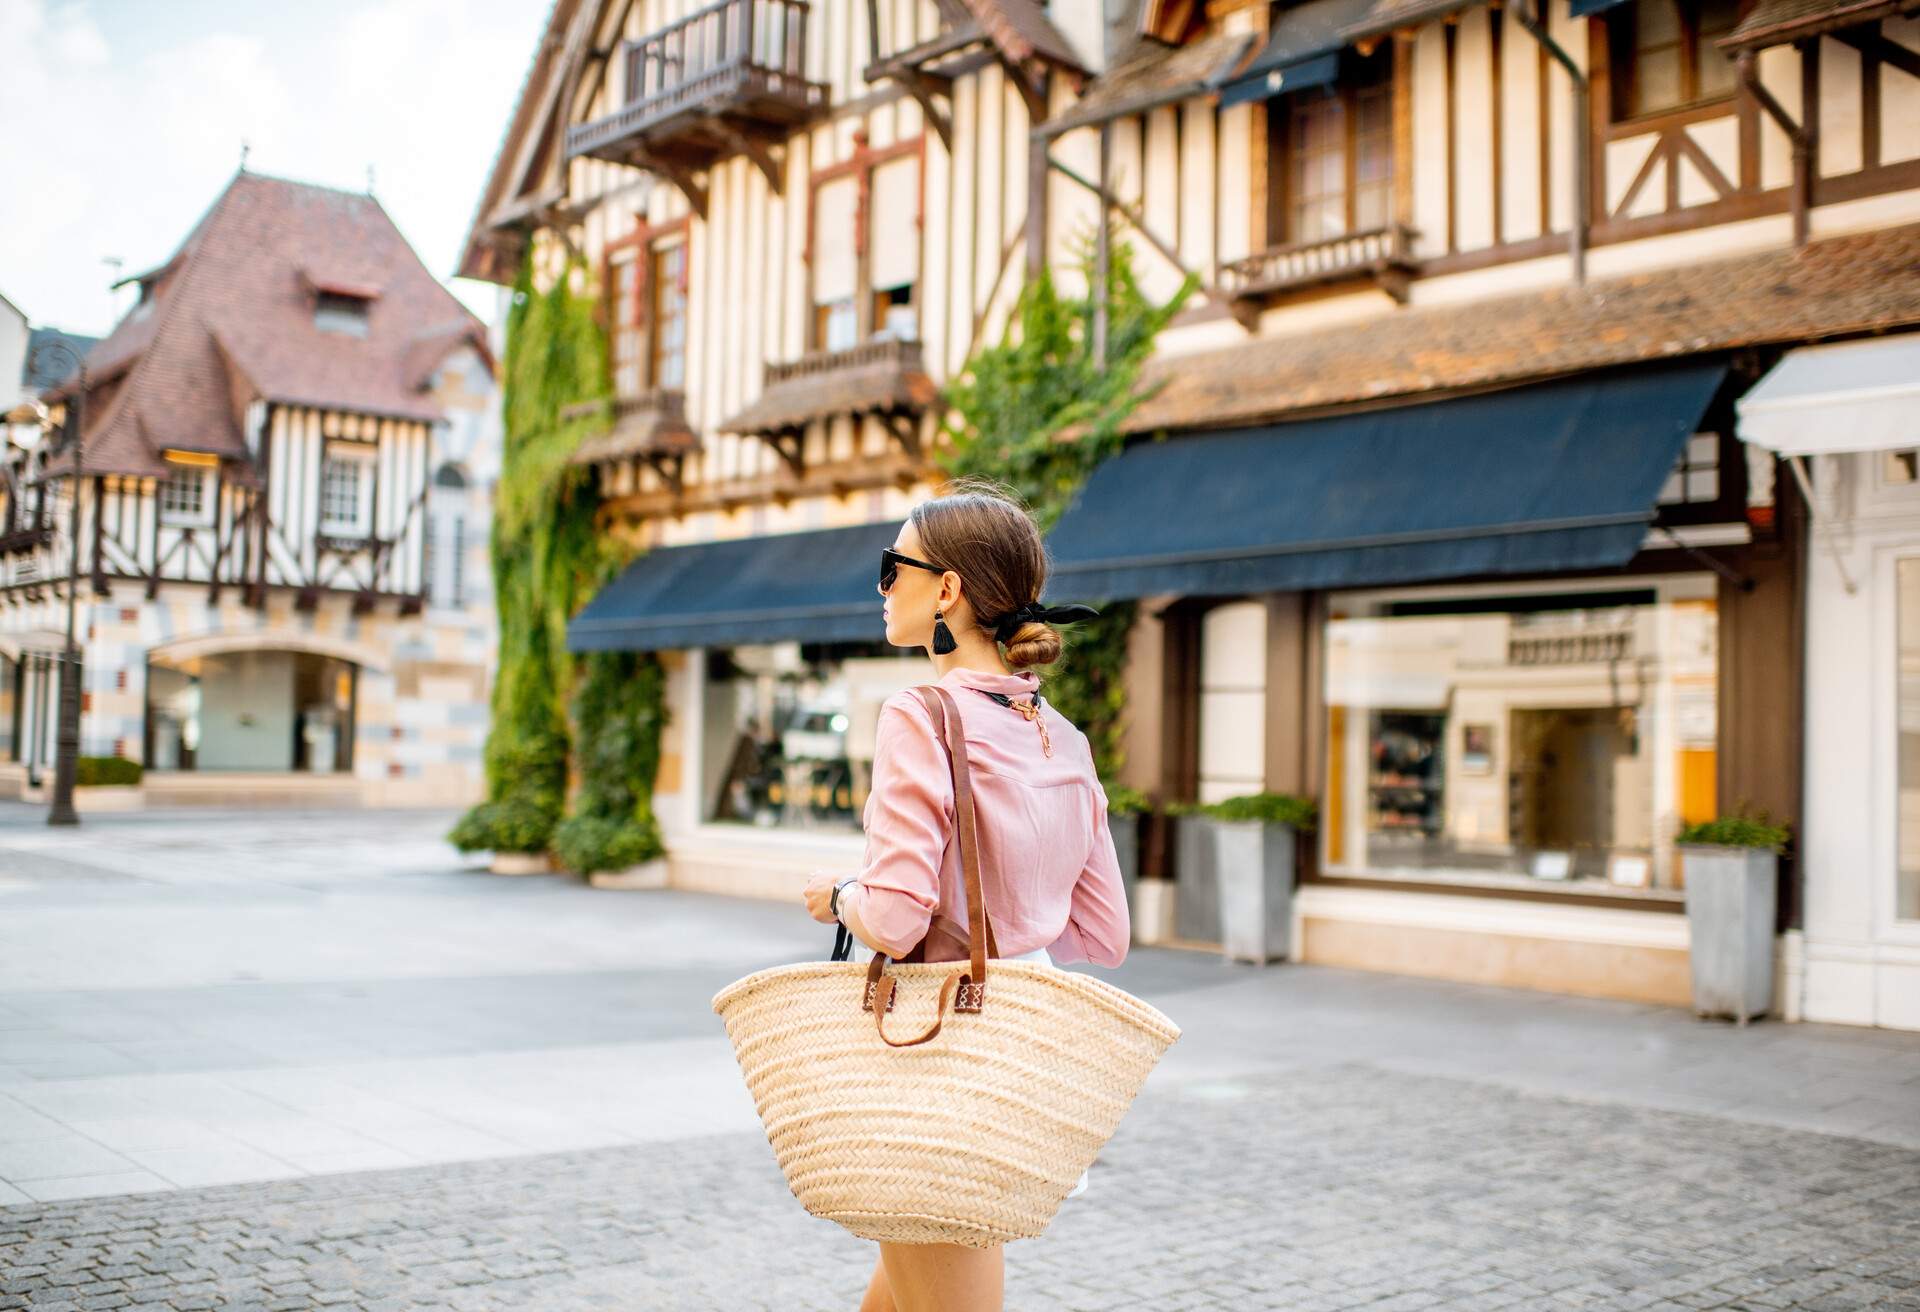 A female walks in a cobbled street lined with typical half-timbered houses and buildings in an old town.